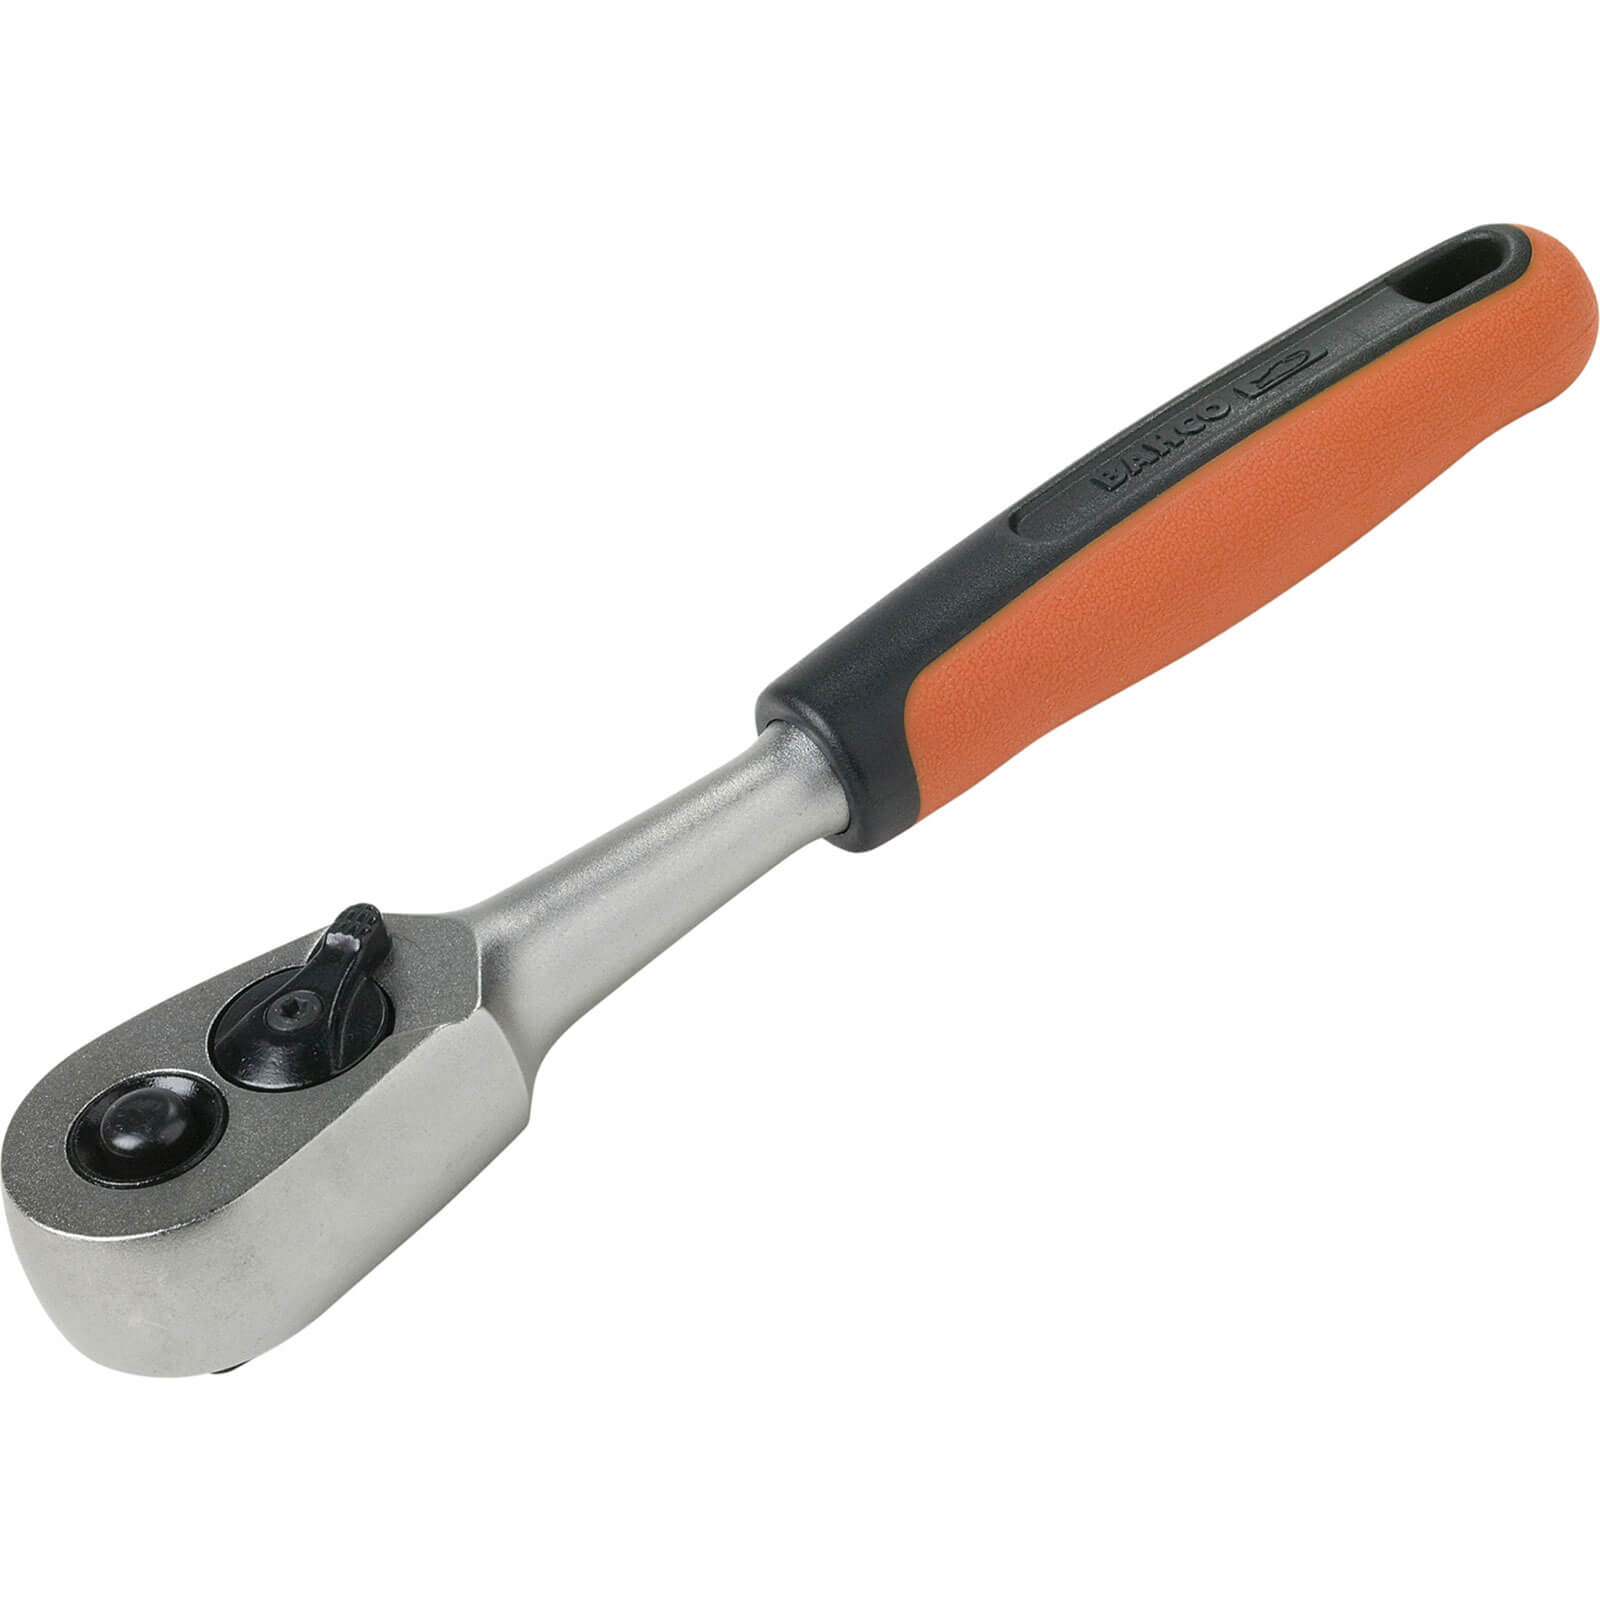 Bahco Ratchet 1/4" Square Drive Sbs61